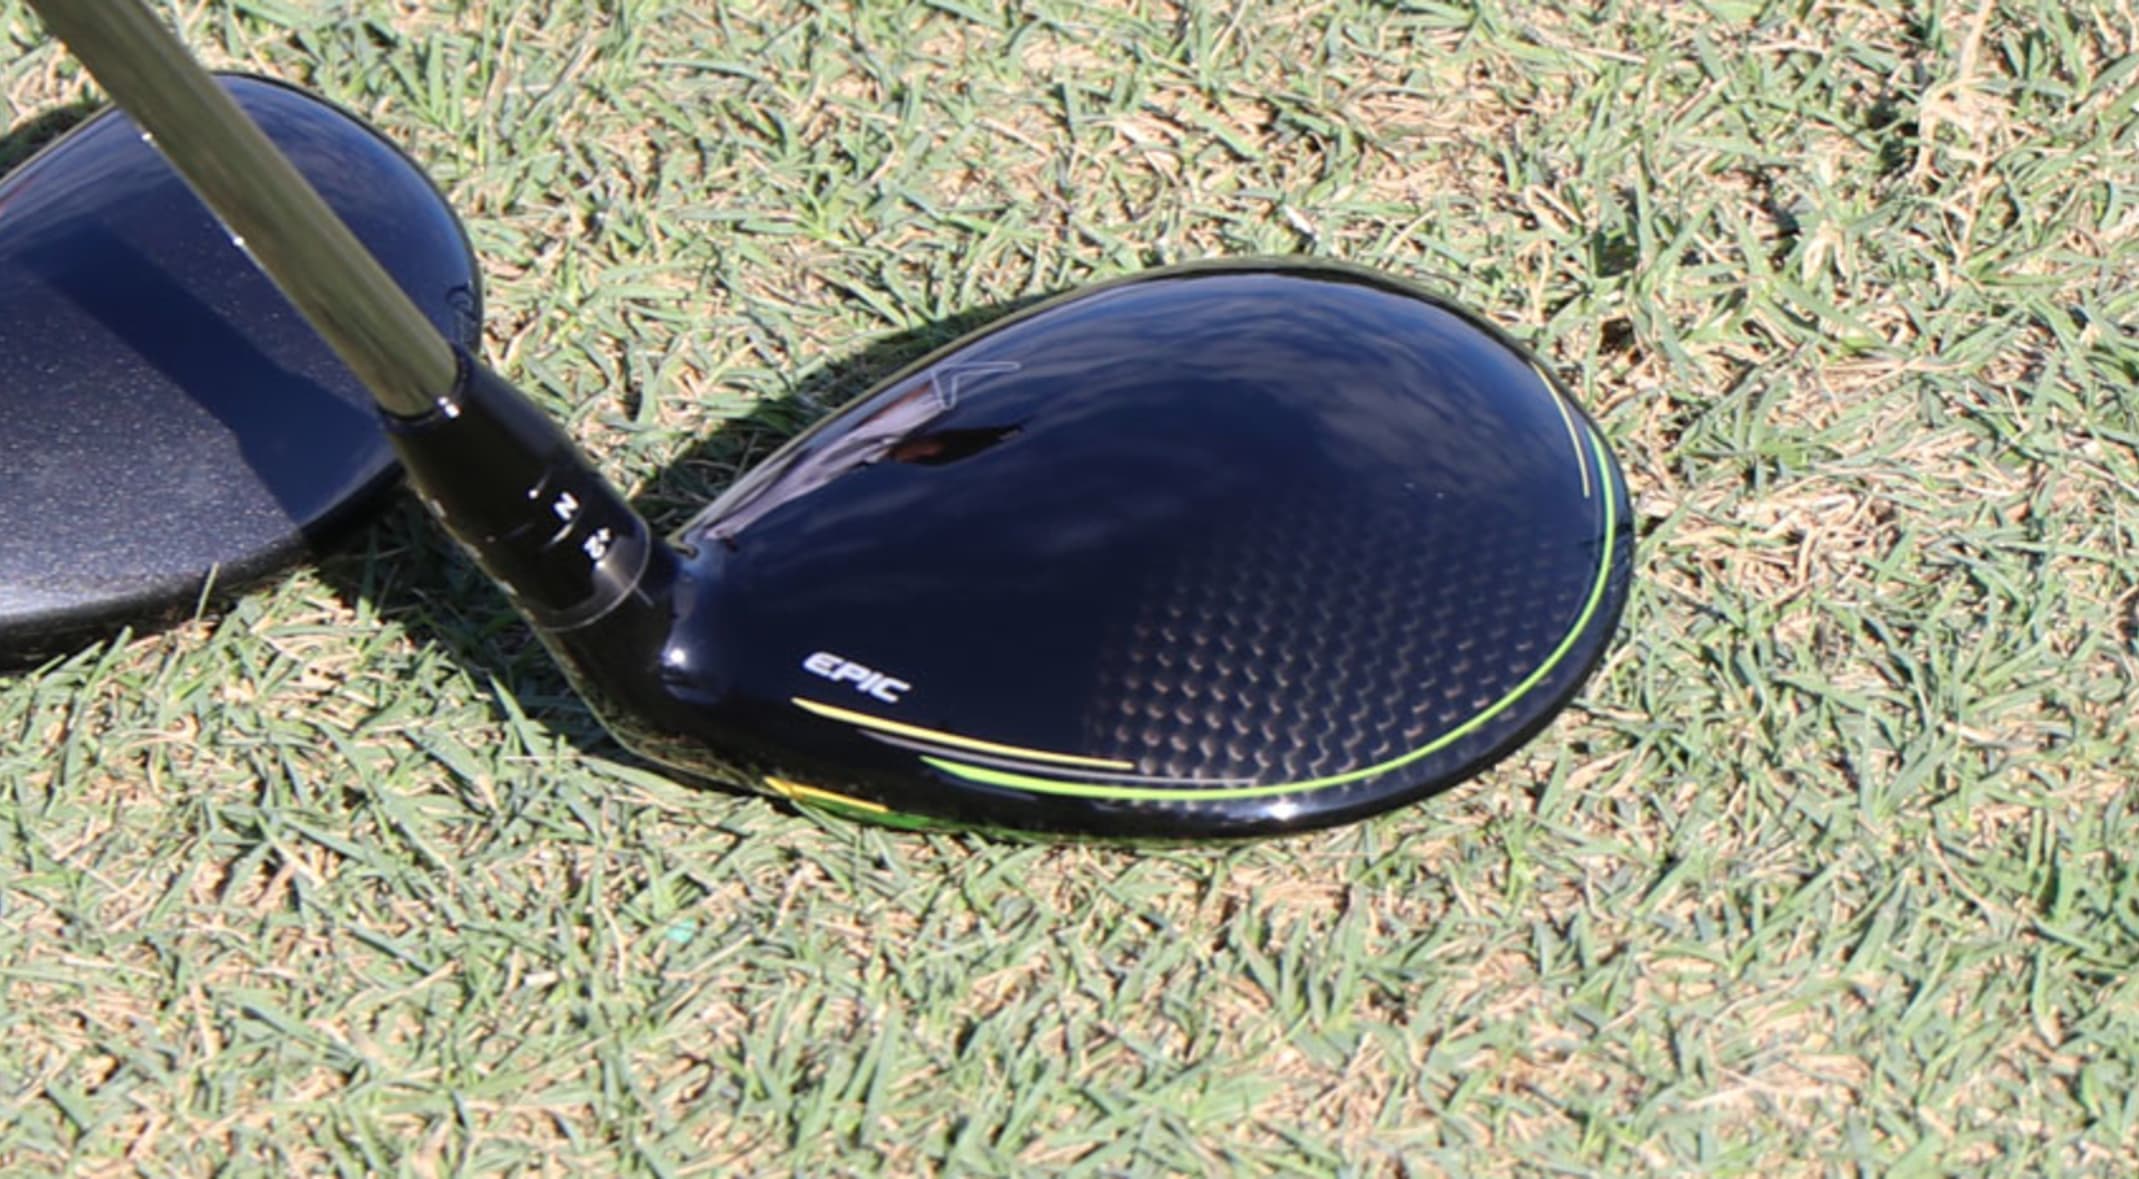 Spotted Callaway Epic Flash Driver And Fairway Woods At Qbe Shootout